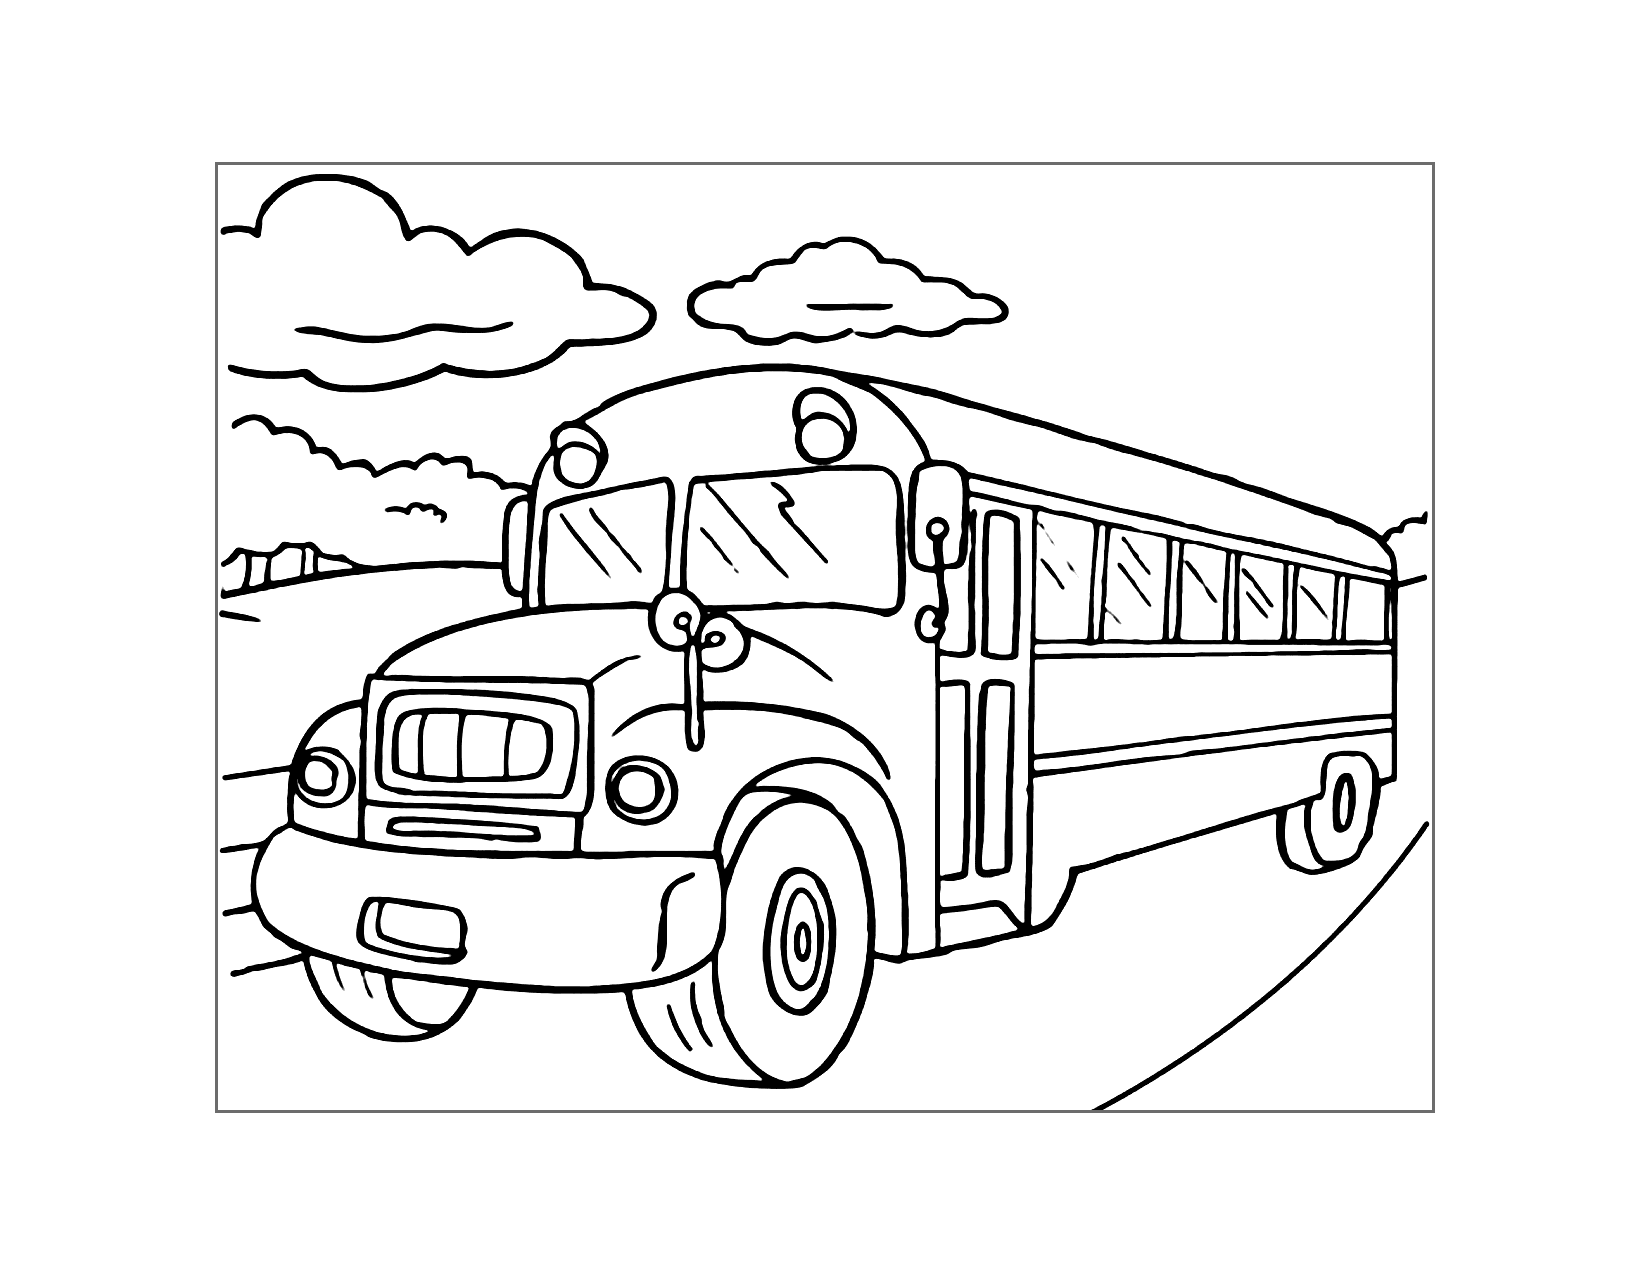 Printable School Bus Coloring Pages